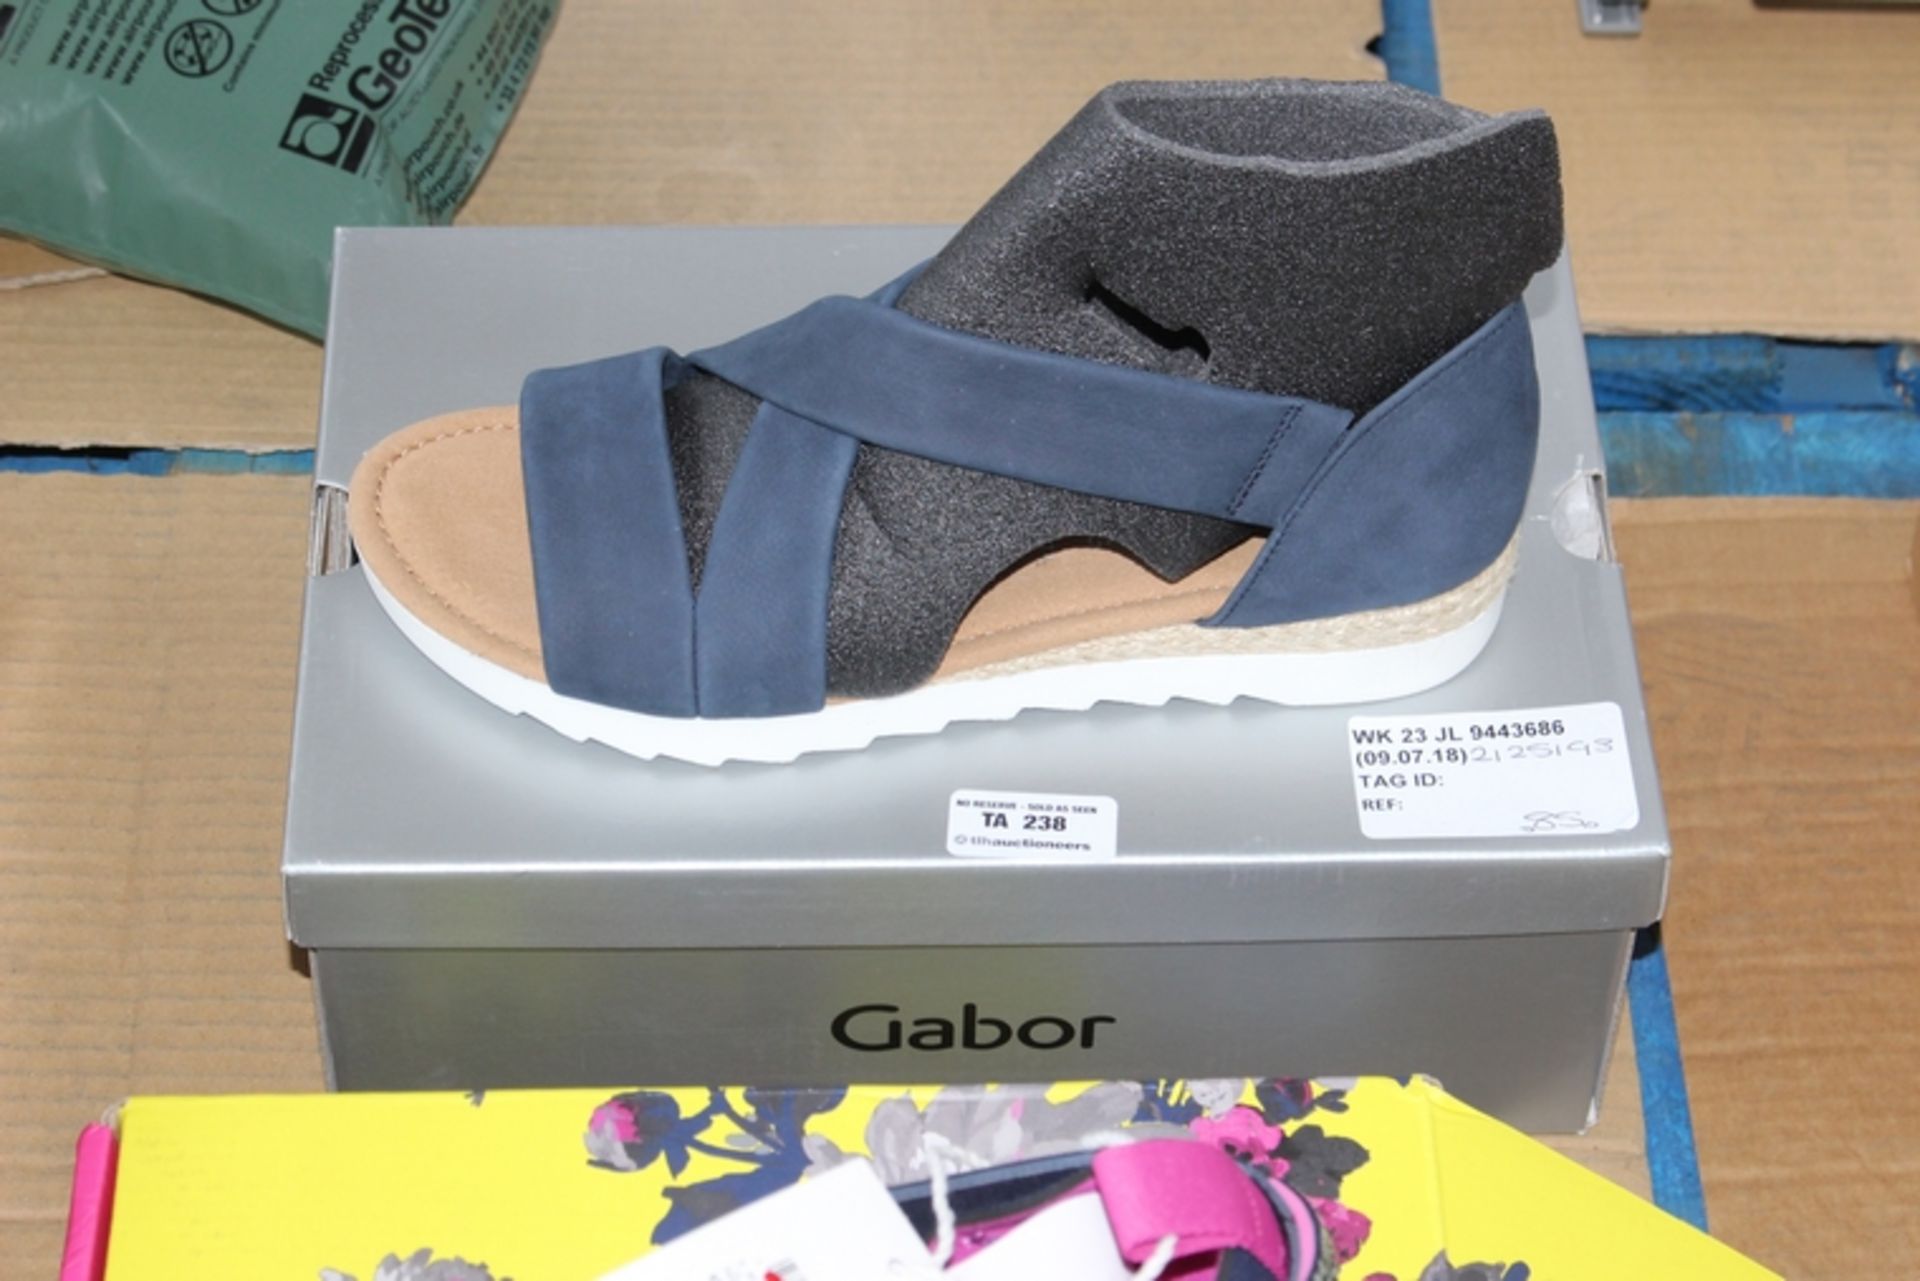 1X PAIR OF GABOR LADIES SHOES SIZE 7.5 RRP £60 (09.07.18) (2125193)